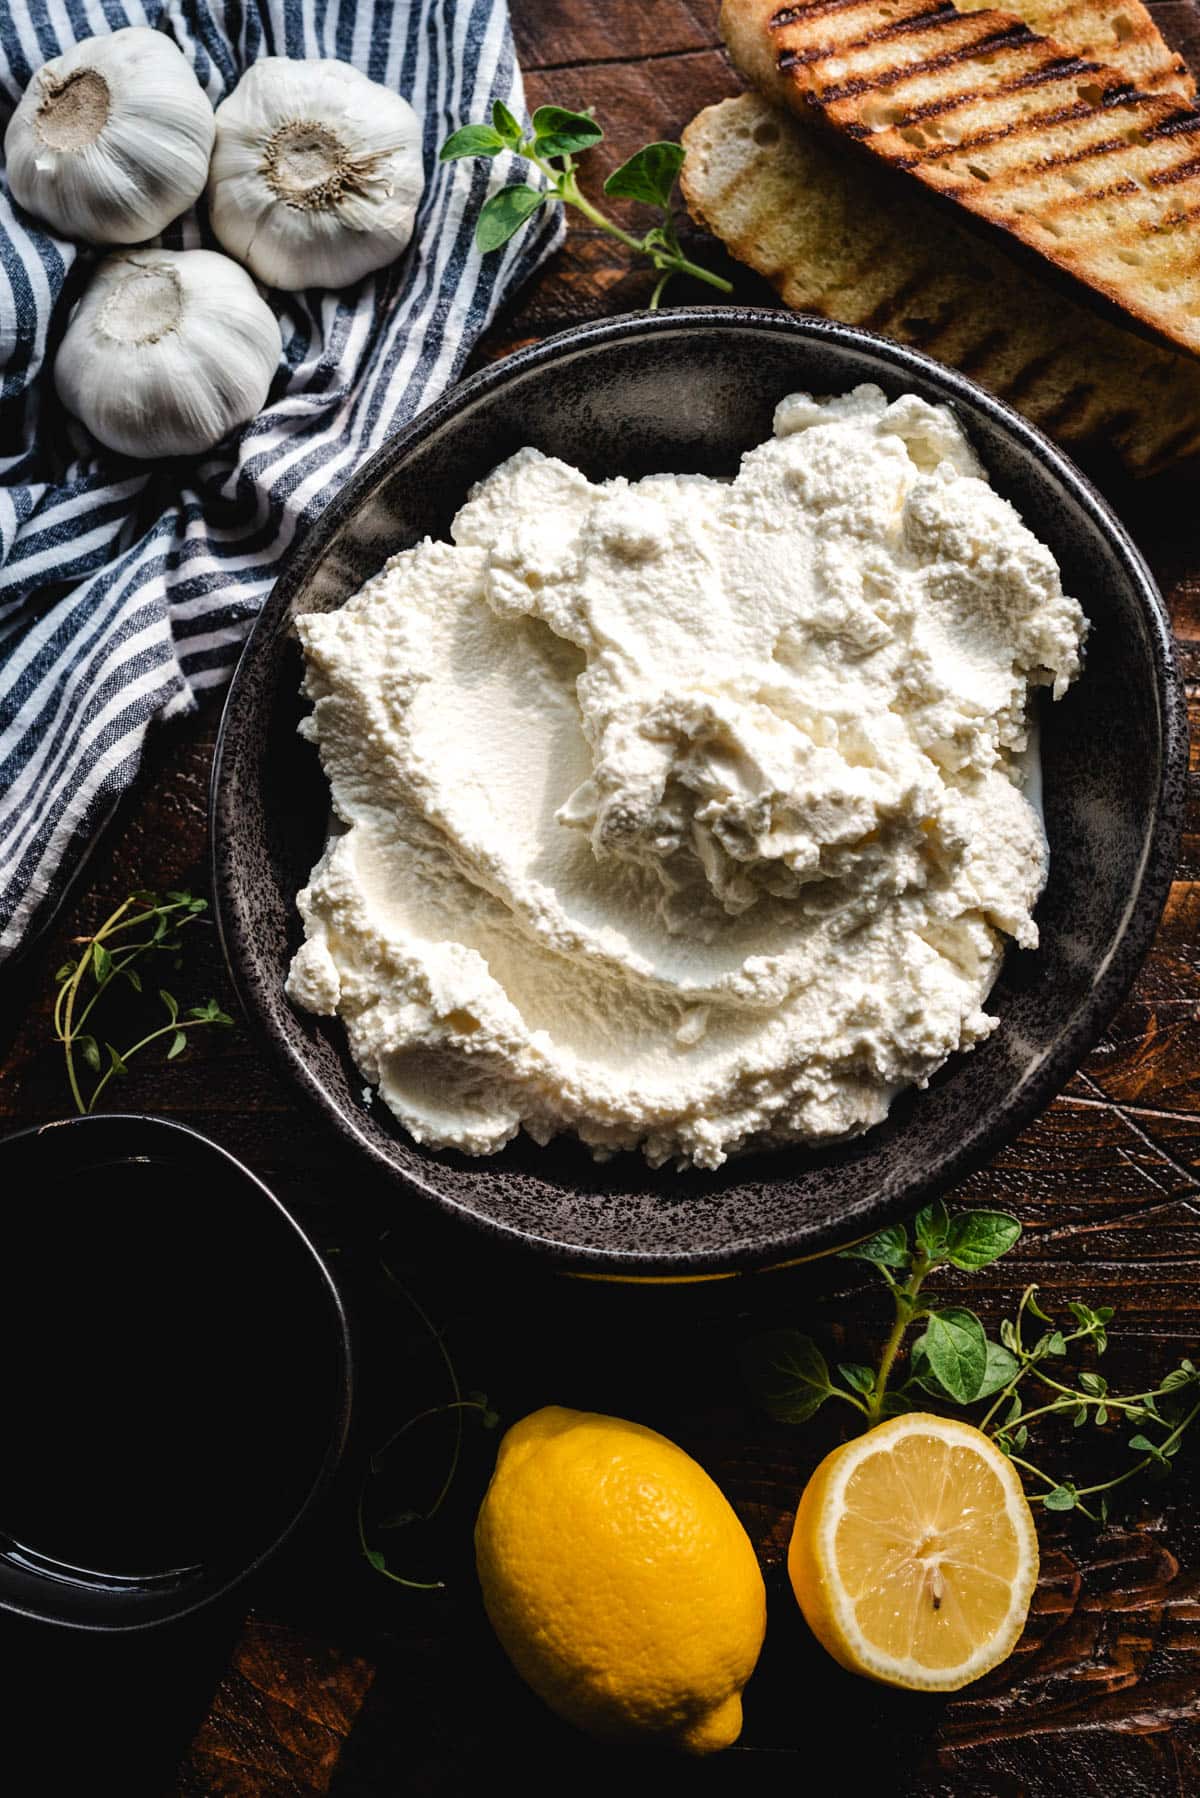 A photo of ingredients for whipped ricotta: ricotta cheese, grilled bread, olive oil, lemons, herbs, and garlic.